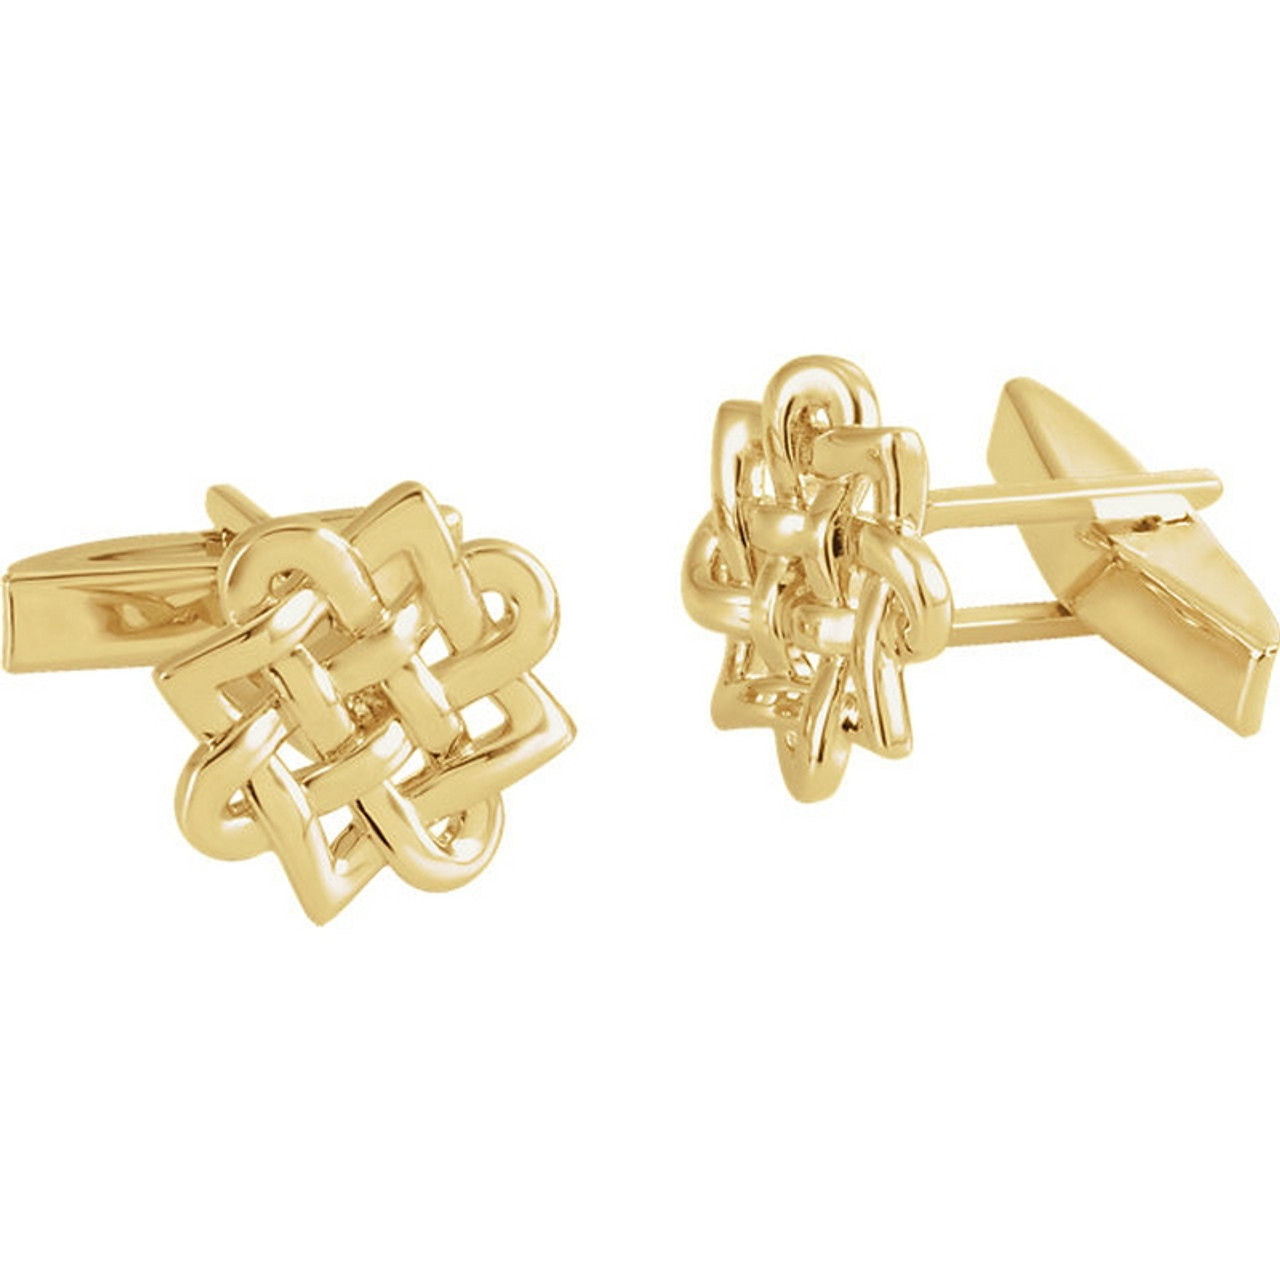 Celtic Endless Knot Cufflinks in 14k Gold